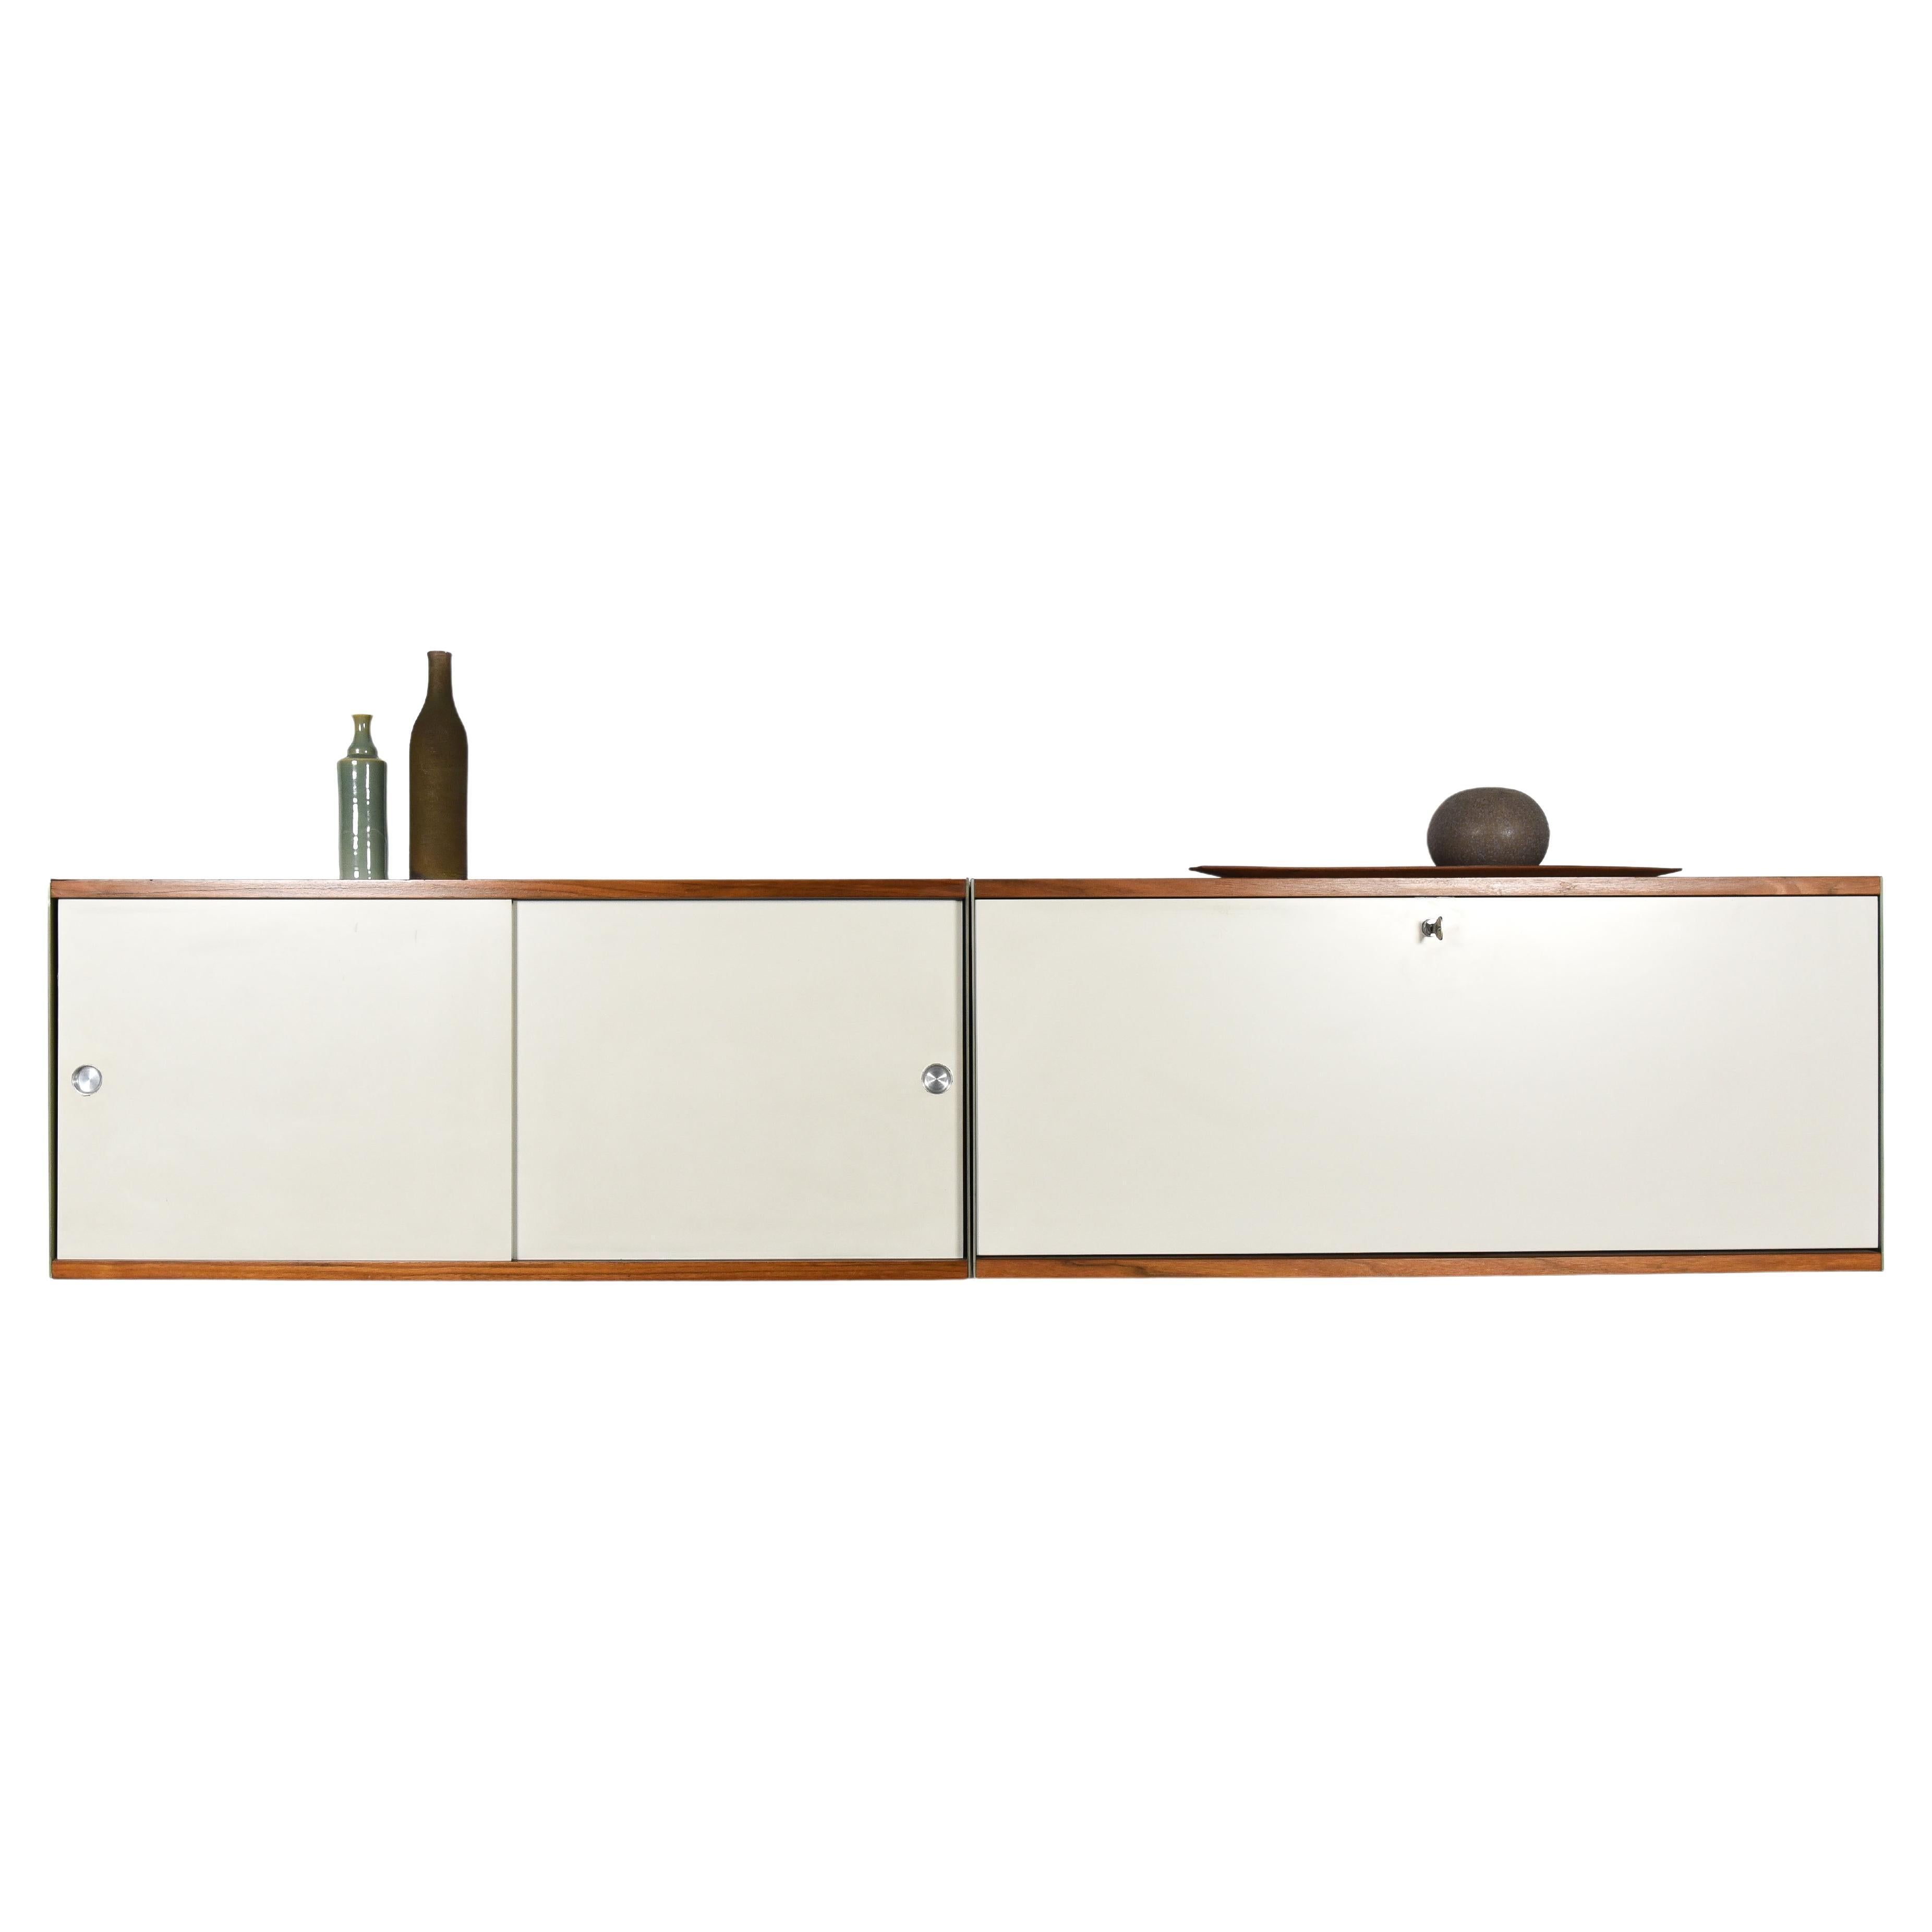 The Modular Shelving System 606 is an absolute design classic, designed by Dieter Rams in 1960 for VITSOE. Extremely rare variant with teak wood shelves and off-white fronts.
The sideboard dates from the 1960s and is in very good original